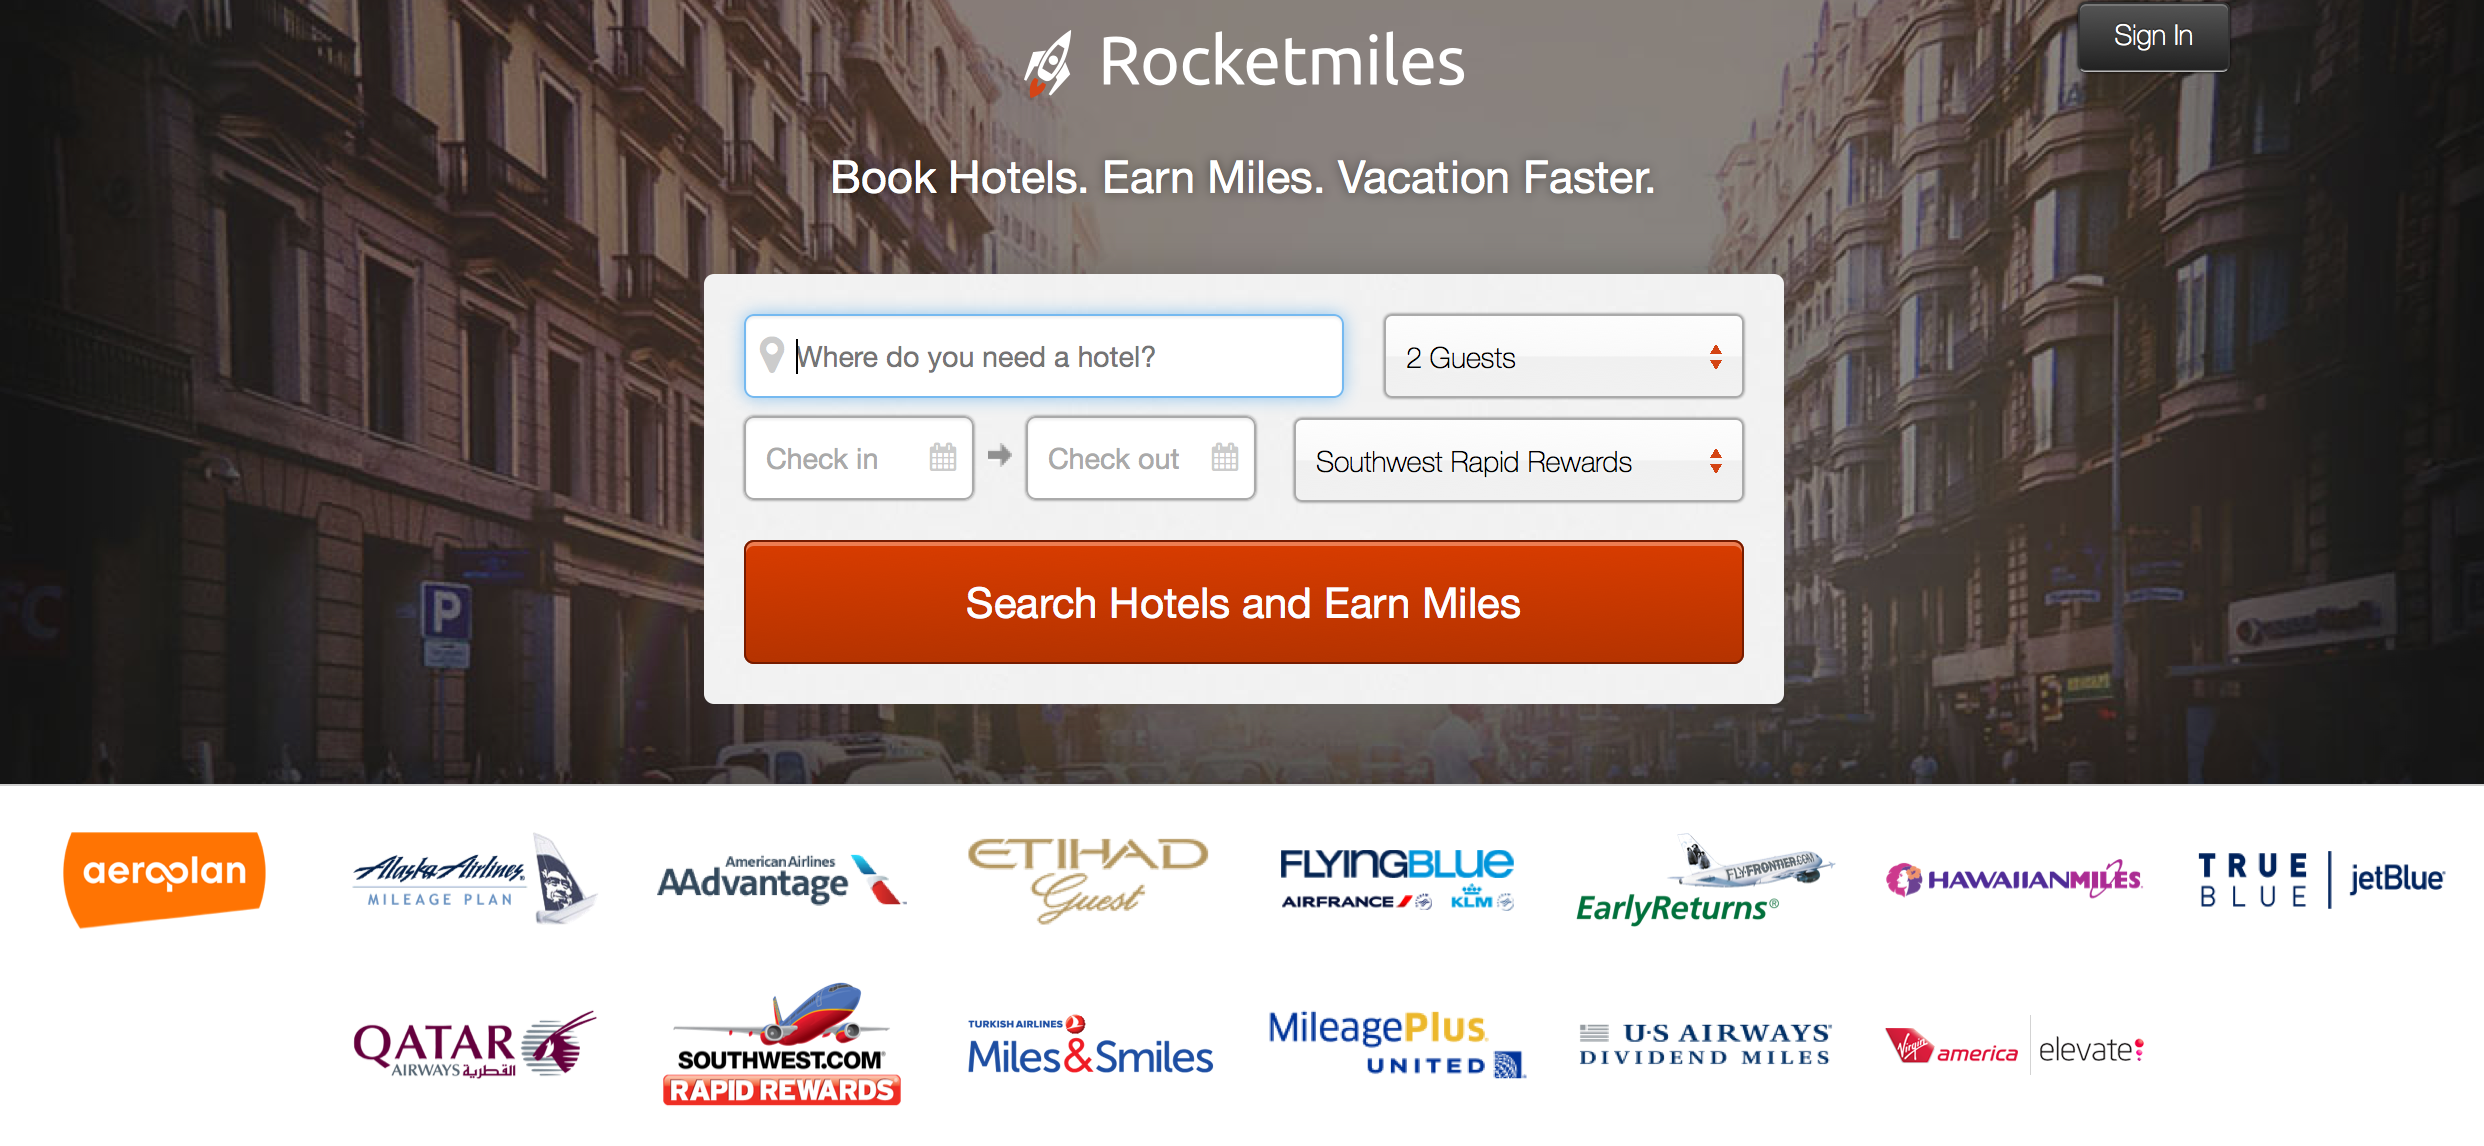 Earning miles & points with Rocketmiles